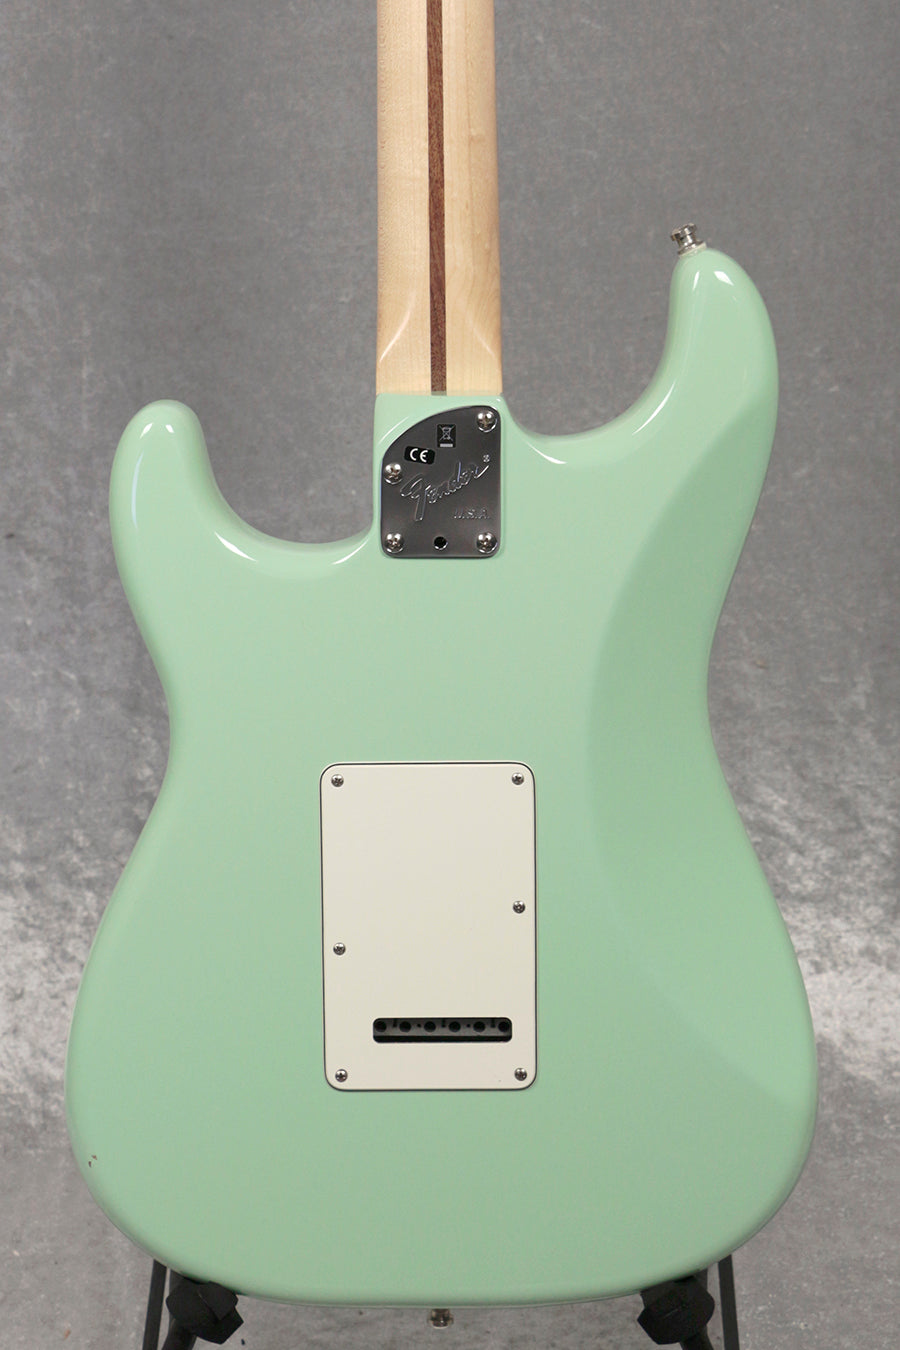 [SN US190217] USED Fender / Jeff Beck Stratocaster Rosewood Surf Green [06]